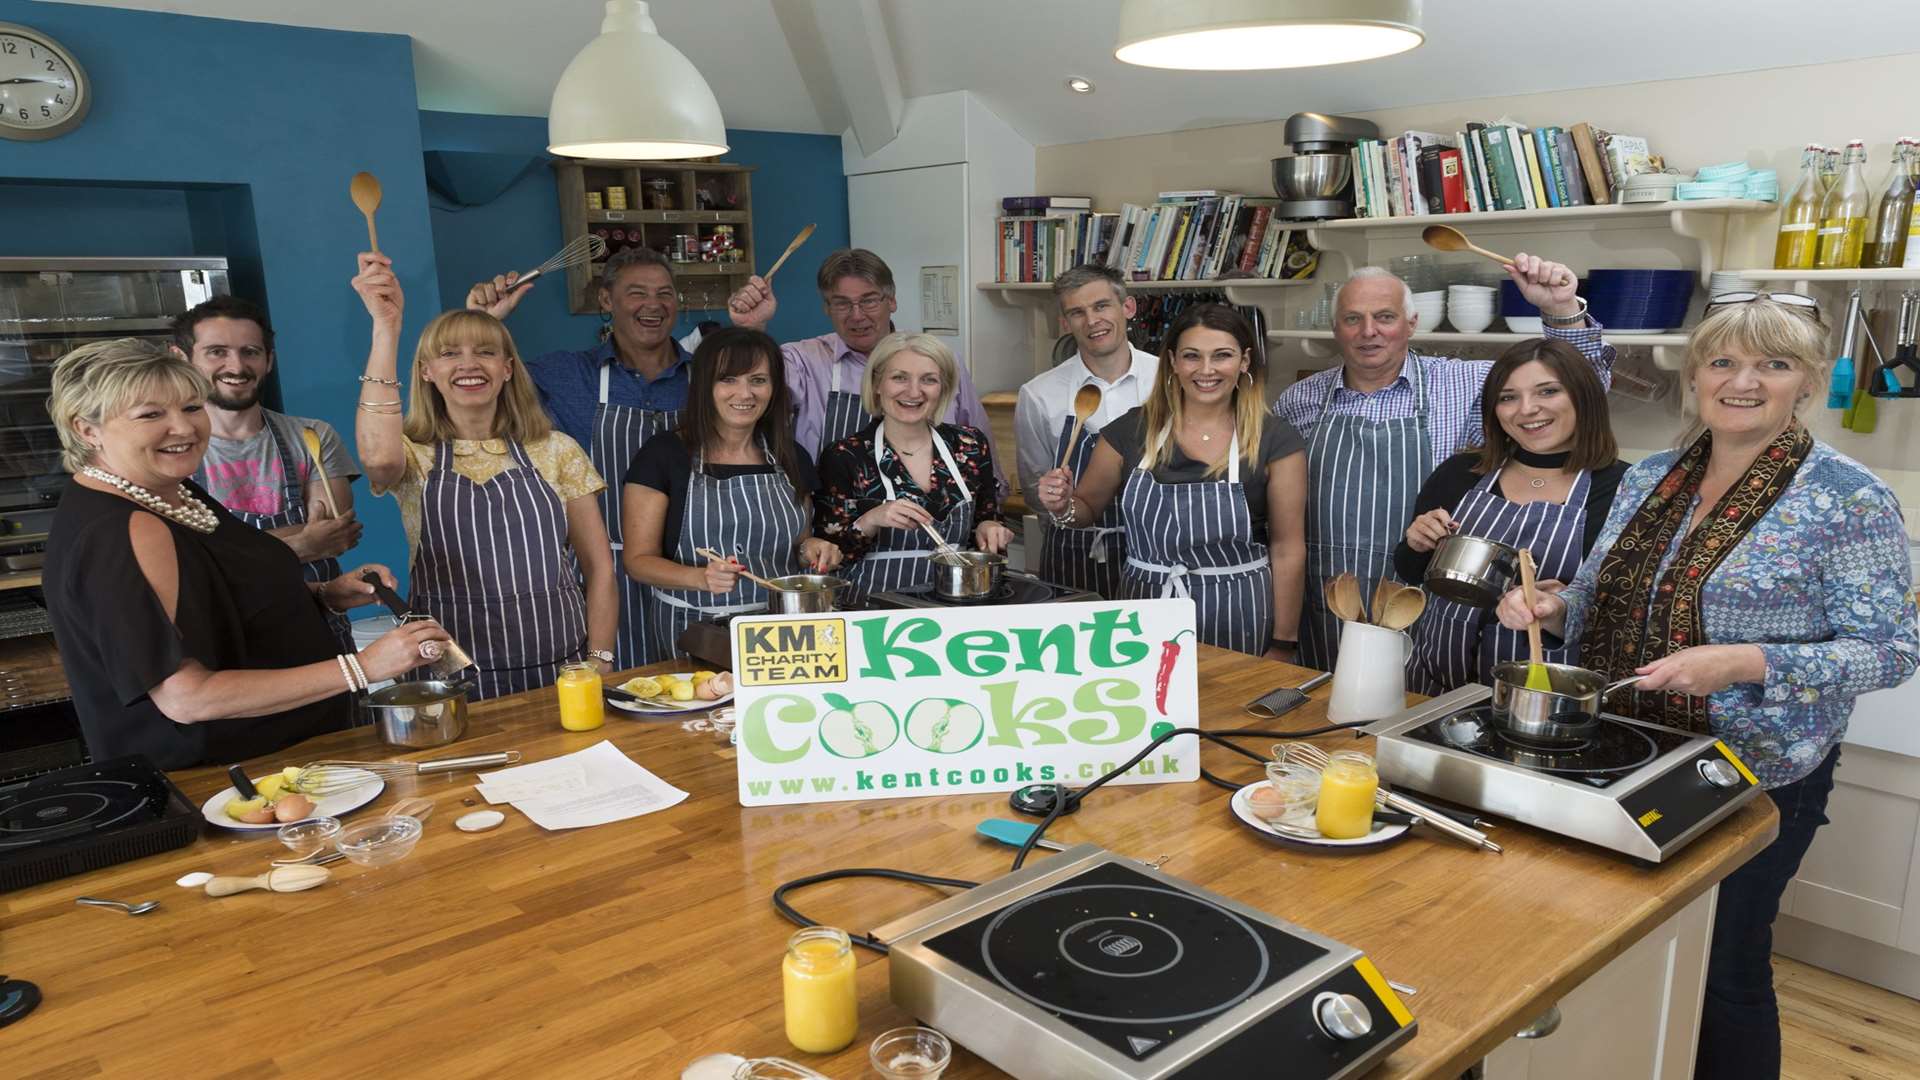 The judging panel are put through their paces at the summer launch of Kent Cooks 2017 at Chequers Kitchen Cookery School, Deal.